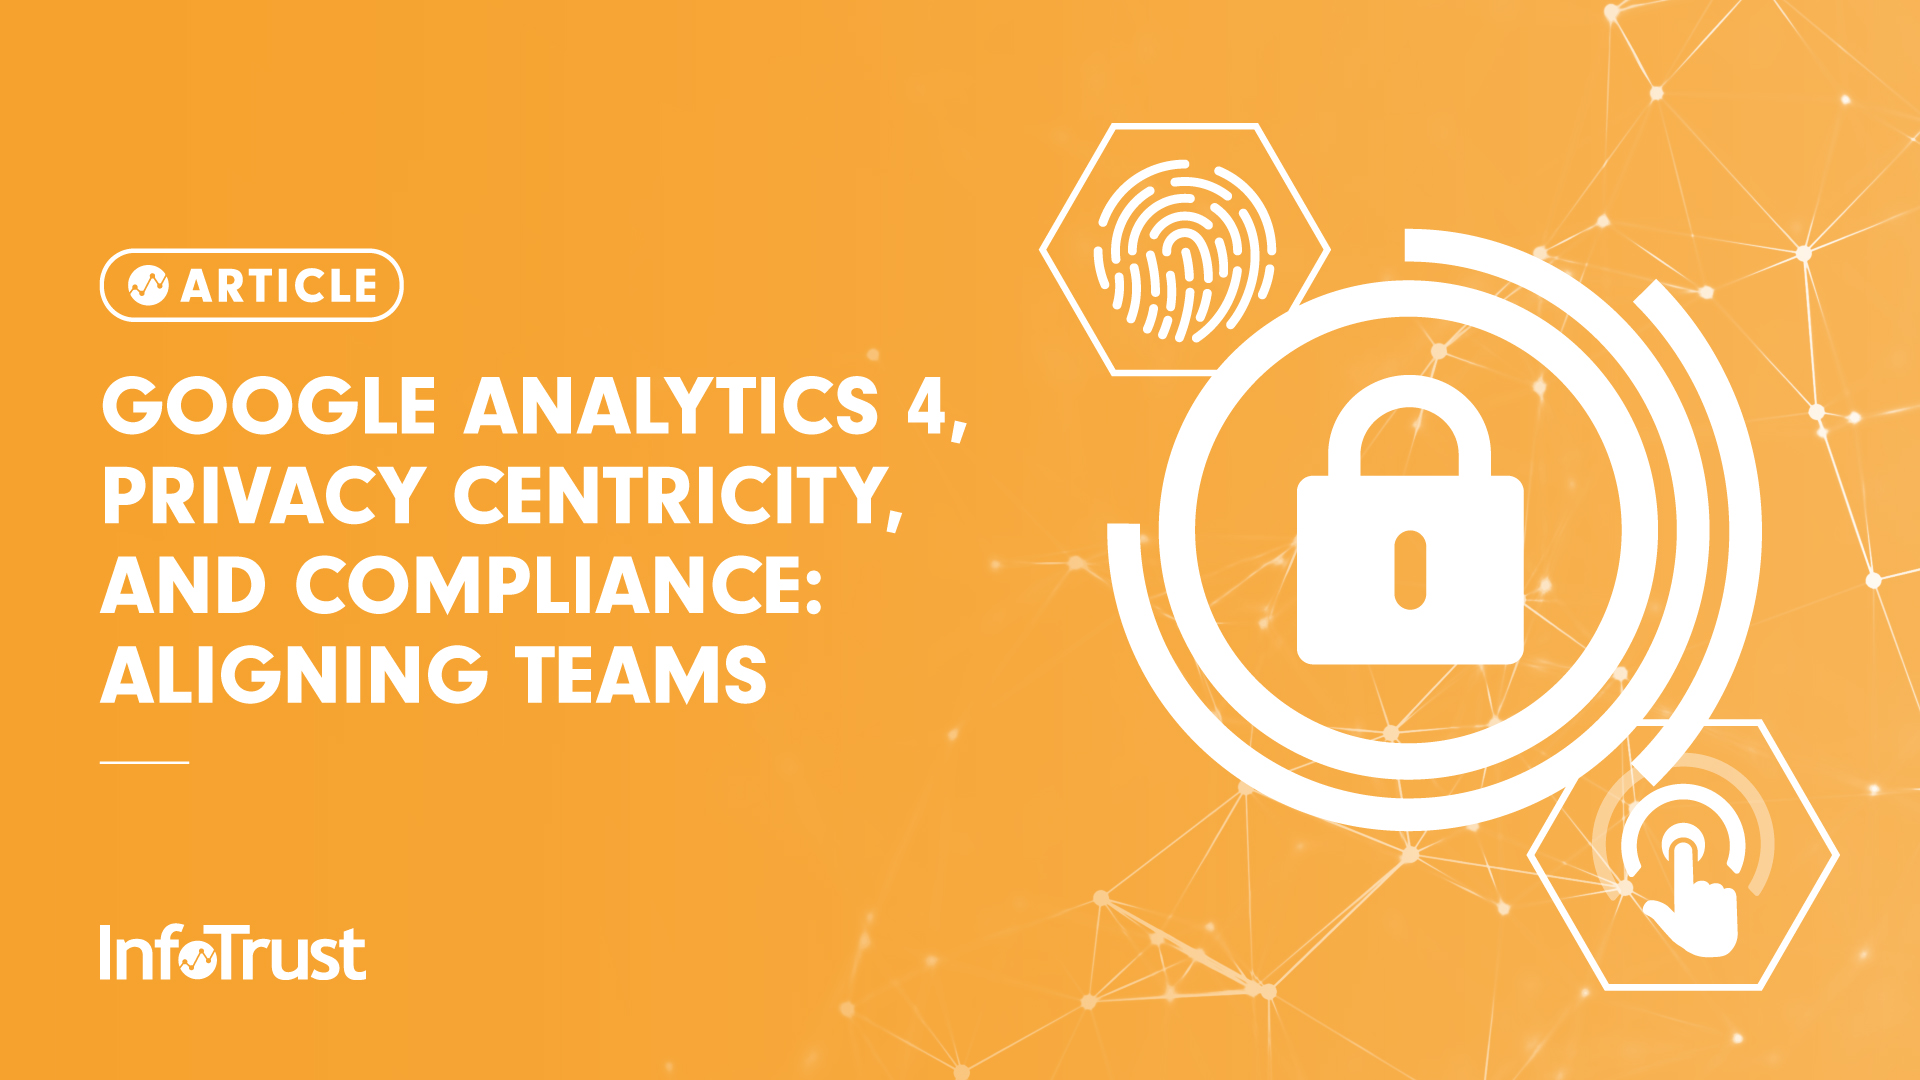 Google Analytics 4, Privacy Centricity, and Compliance: Aligning Teams